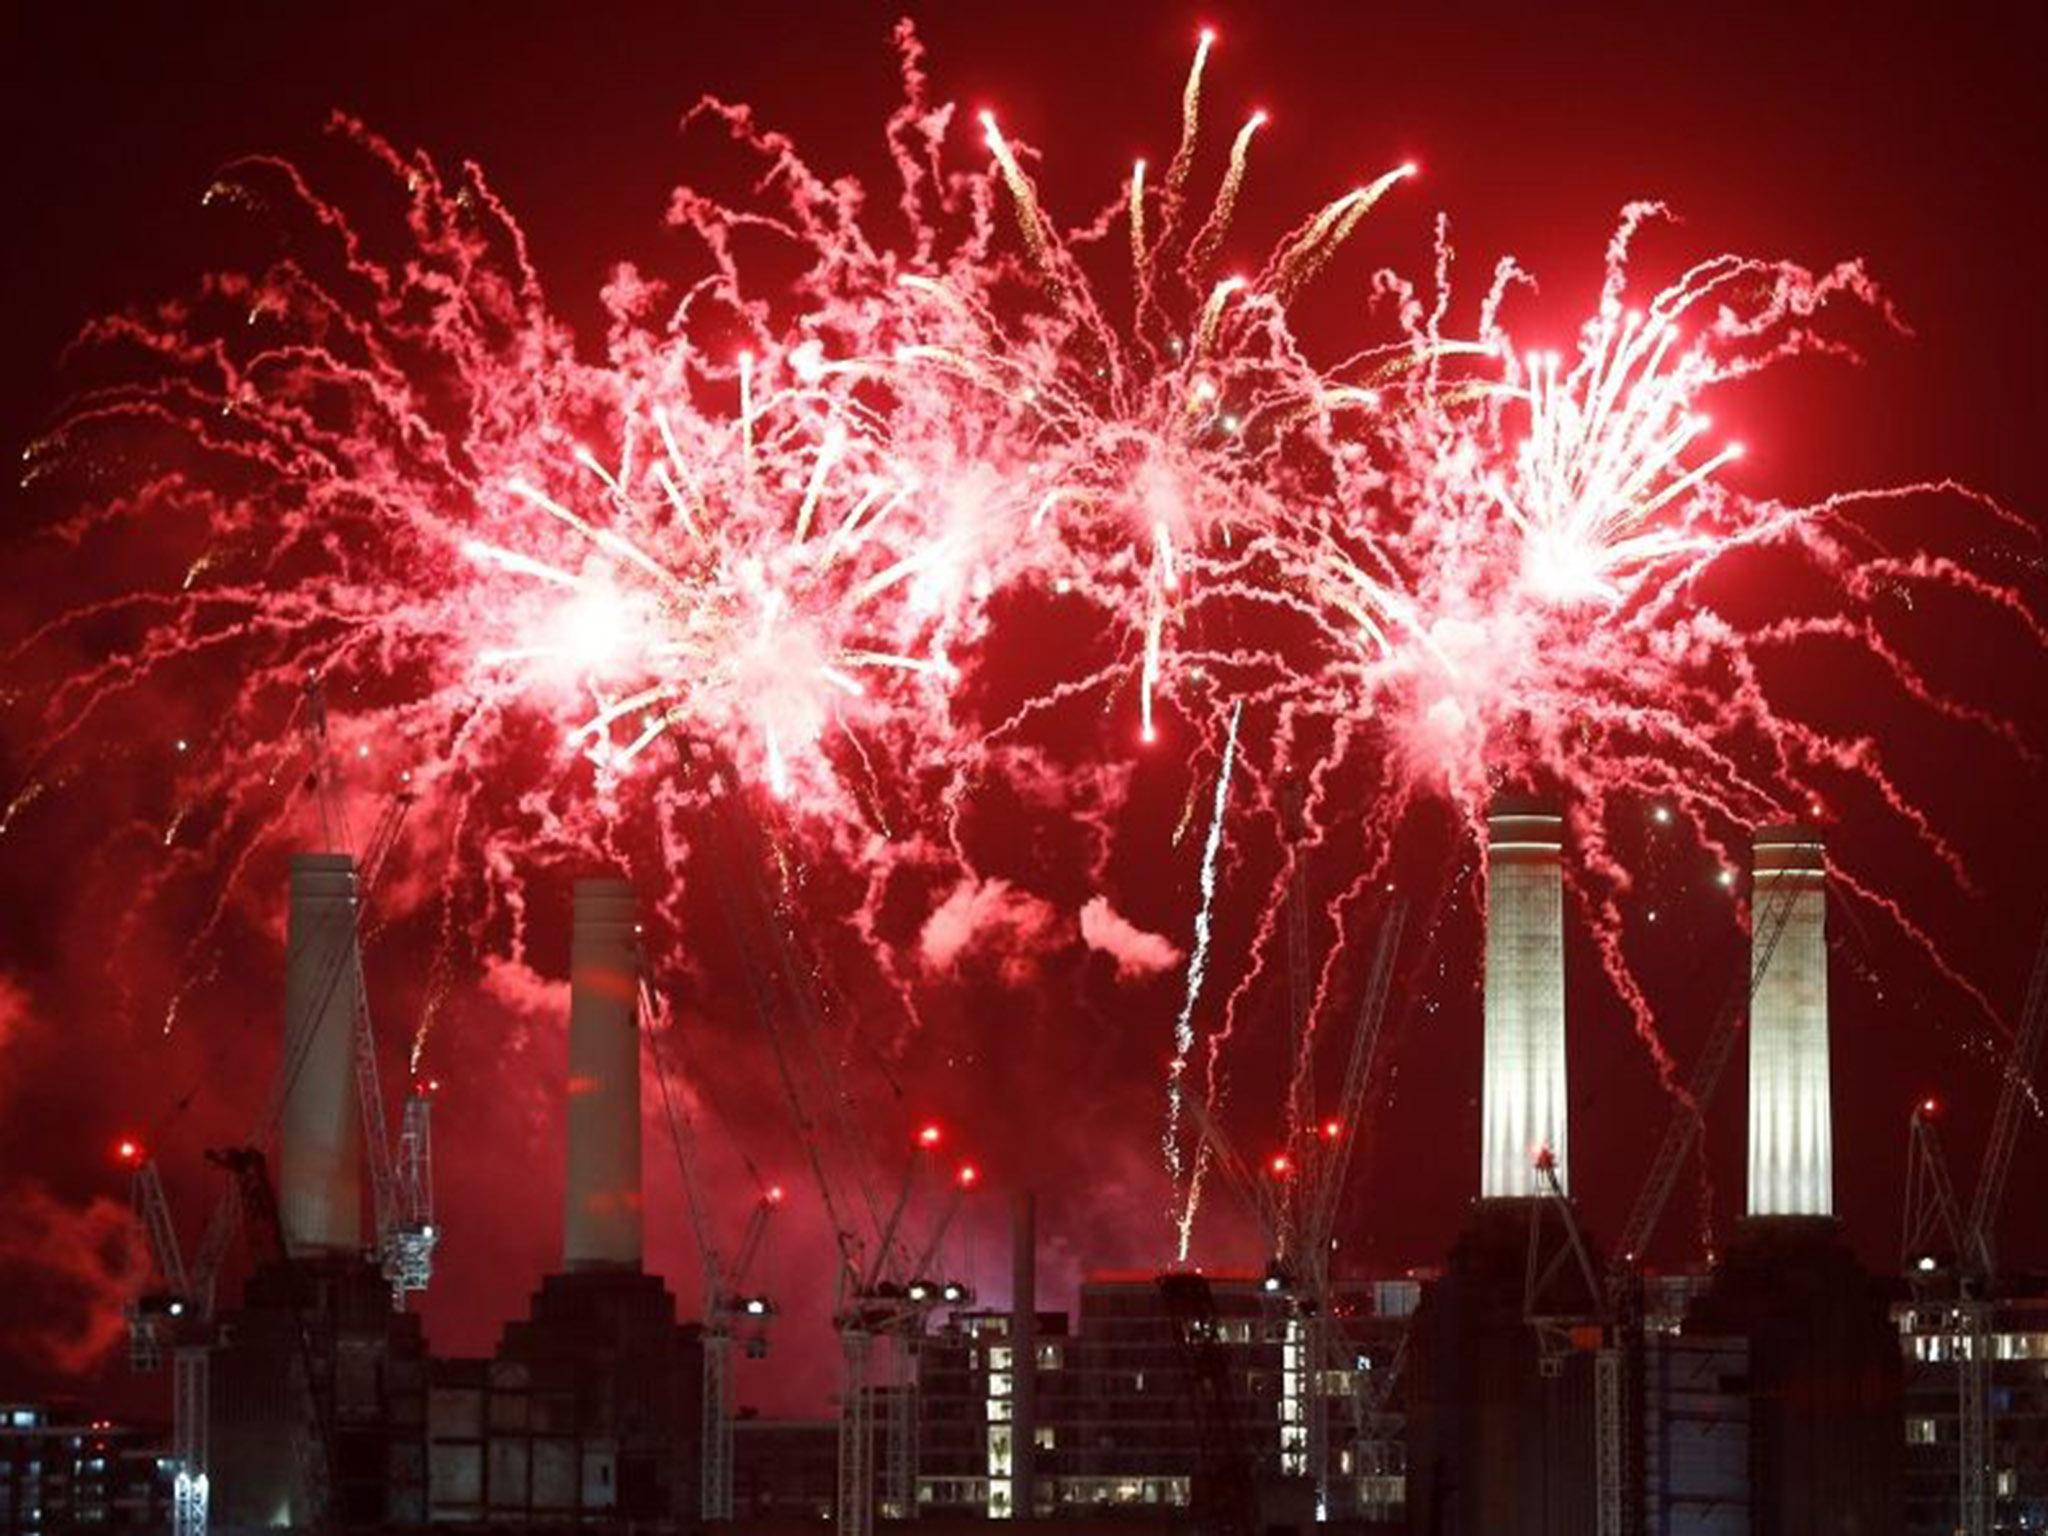 Fireworks ban: Tens of thousands back calls to outlaw public use